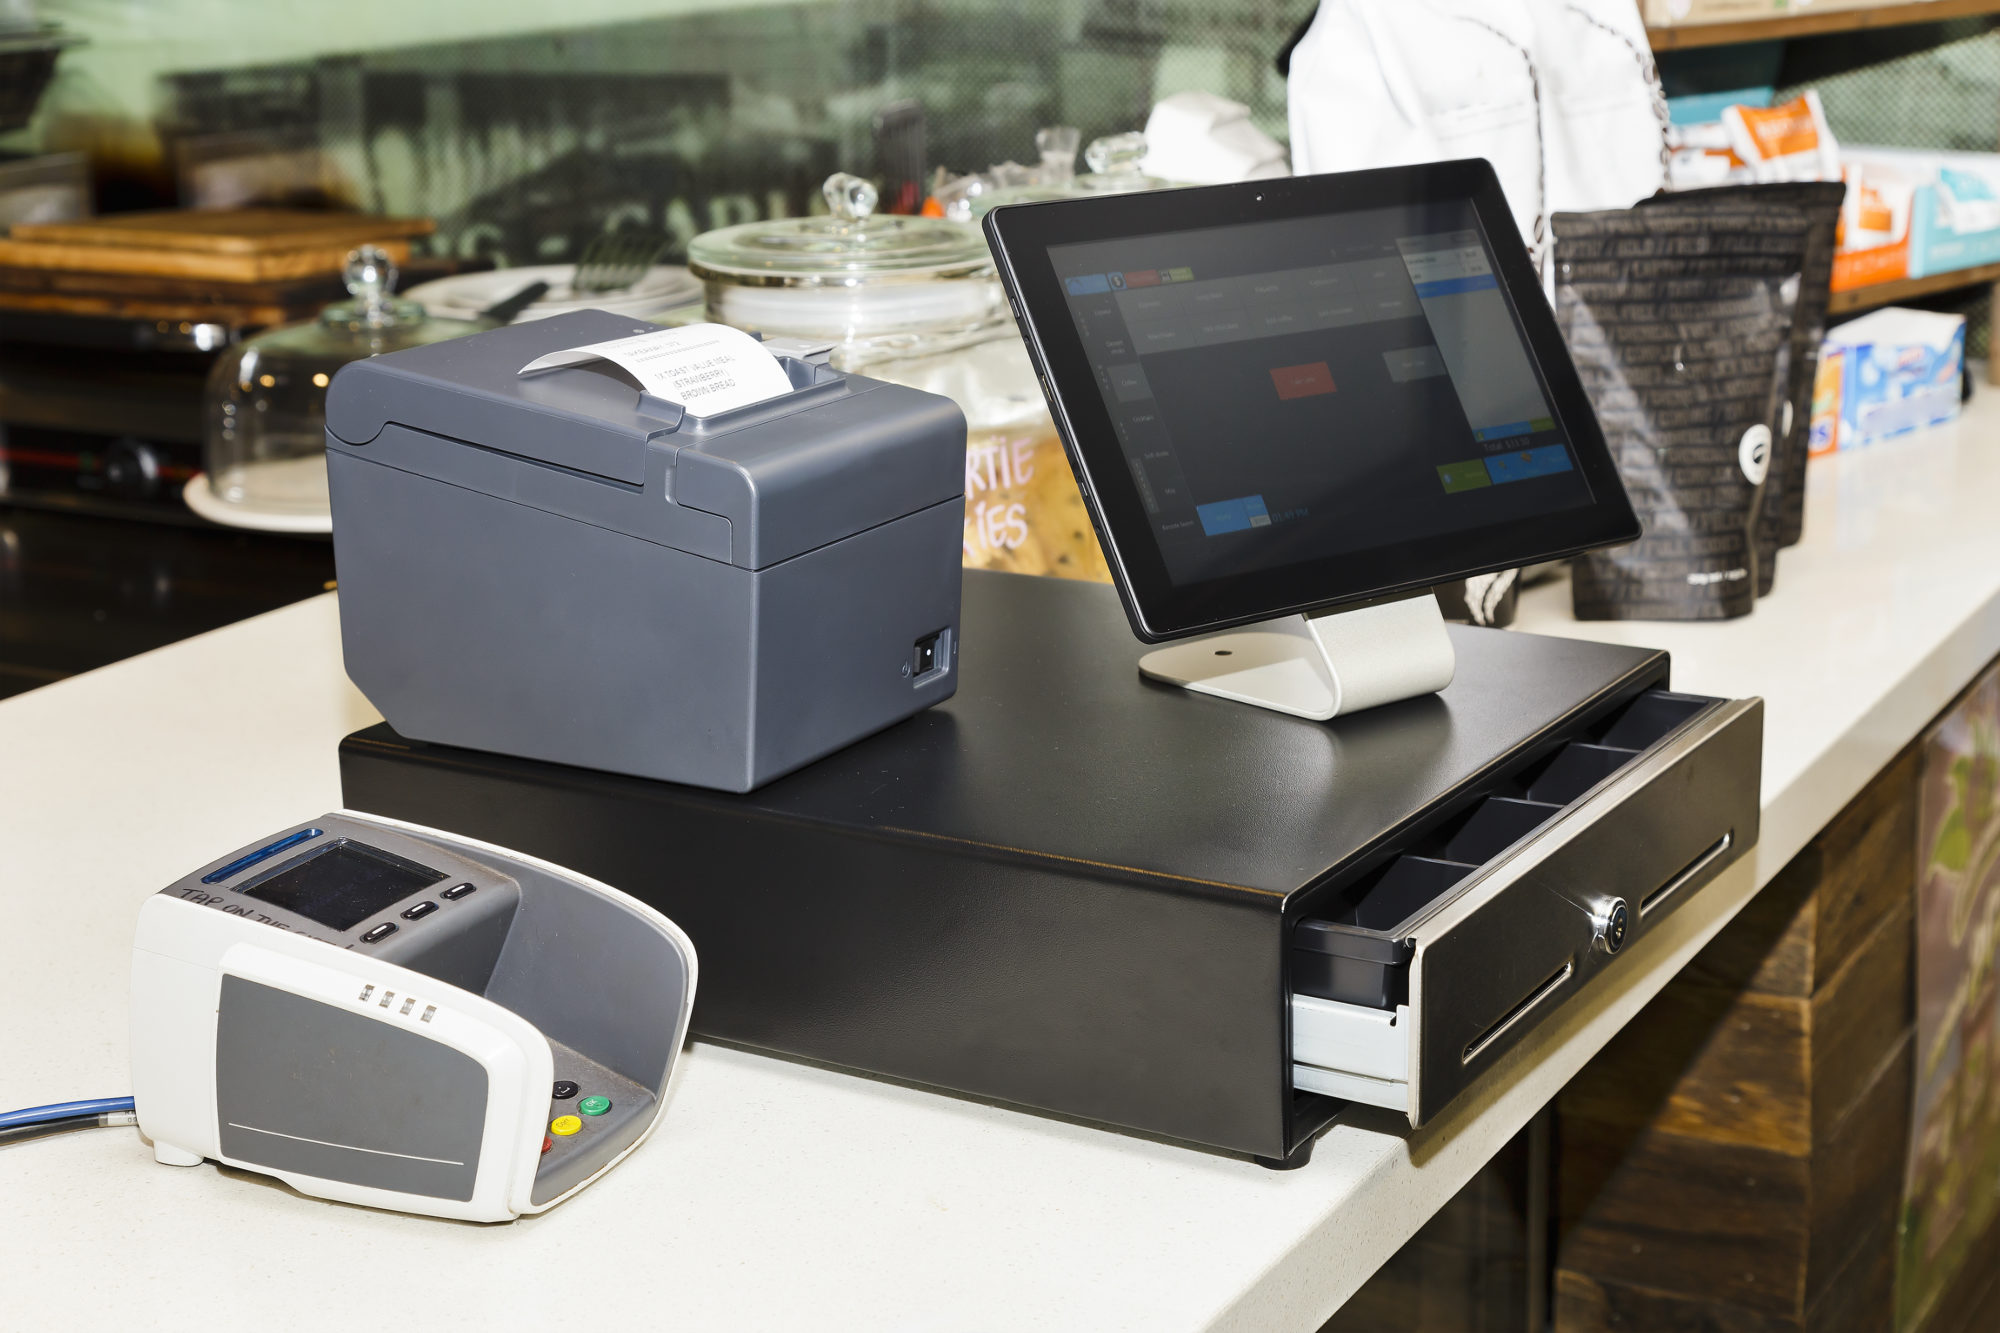 Purchase of cash registers or cash processing systems for secure transactions in Israel